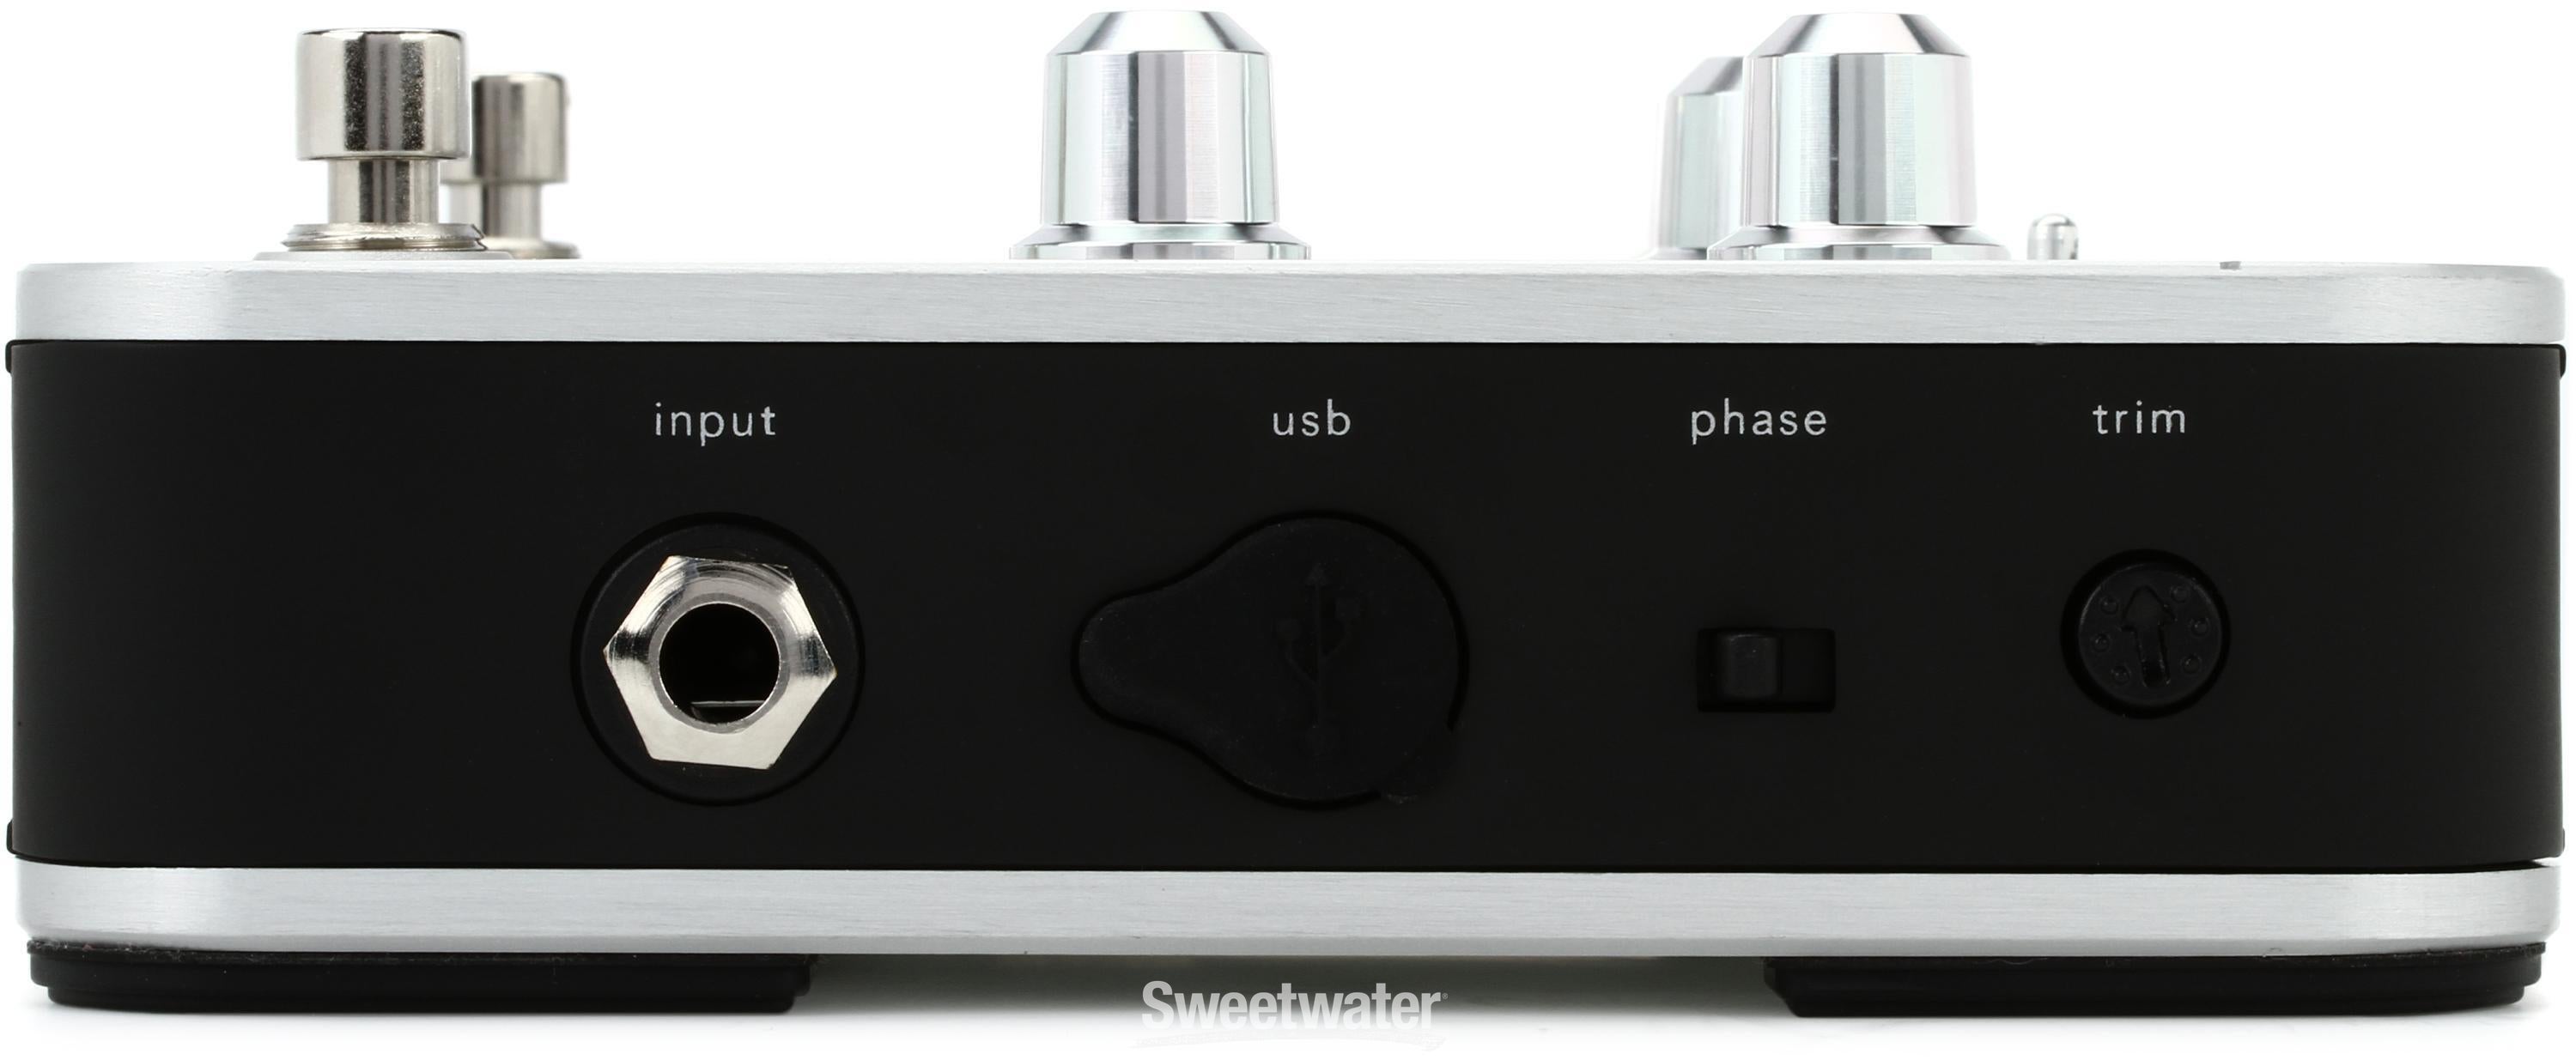 Fishman Aura Spectrum DI Imaging Pedal with D.I. | Sweetwater